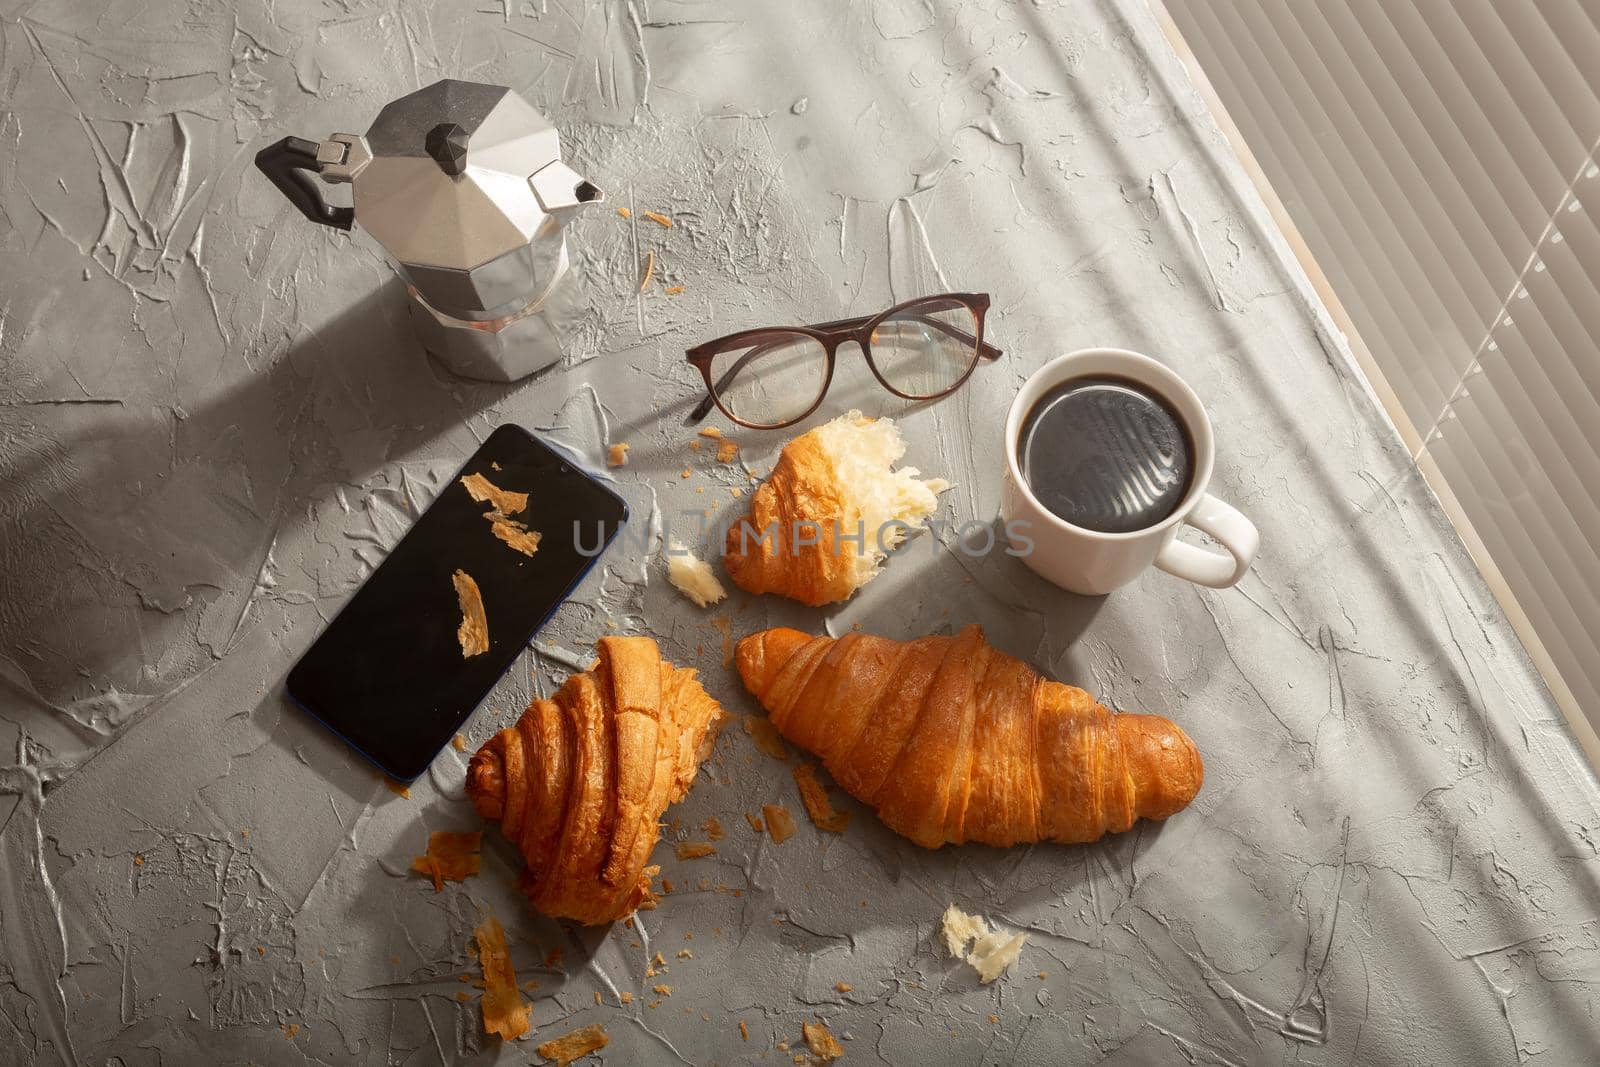 Breakfast with croissant and coffee and moka pot. Morning meal and breakfast concept. by Satura86